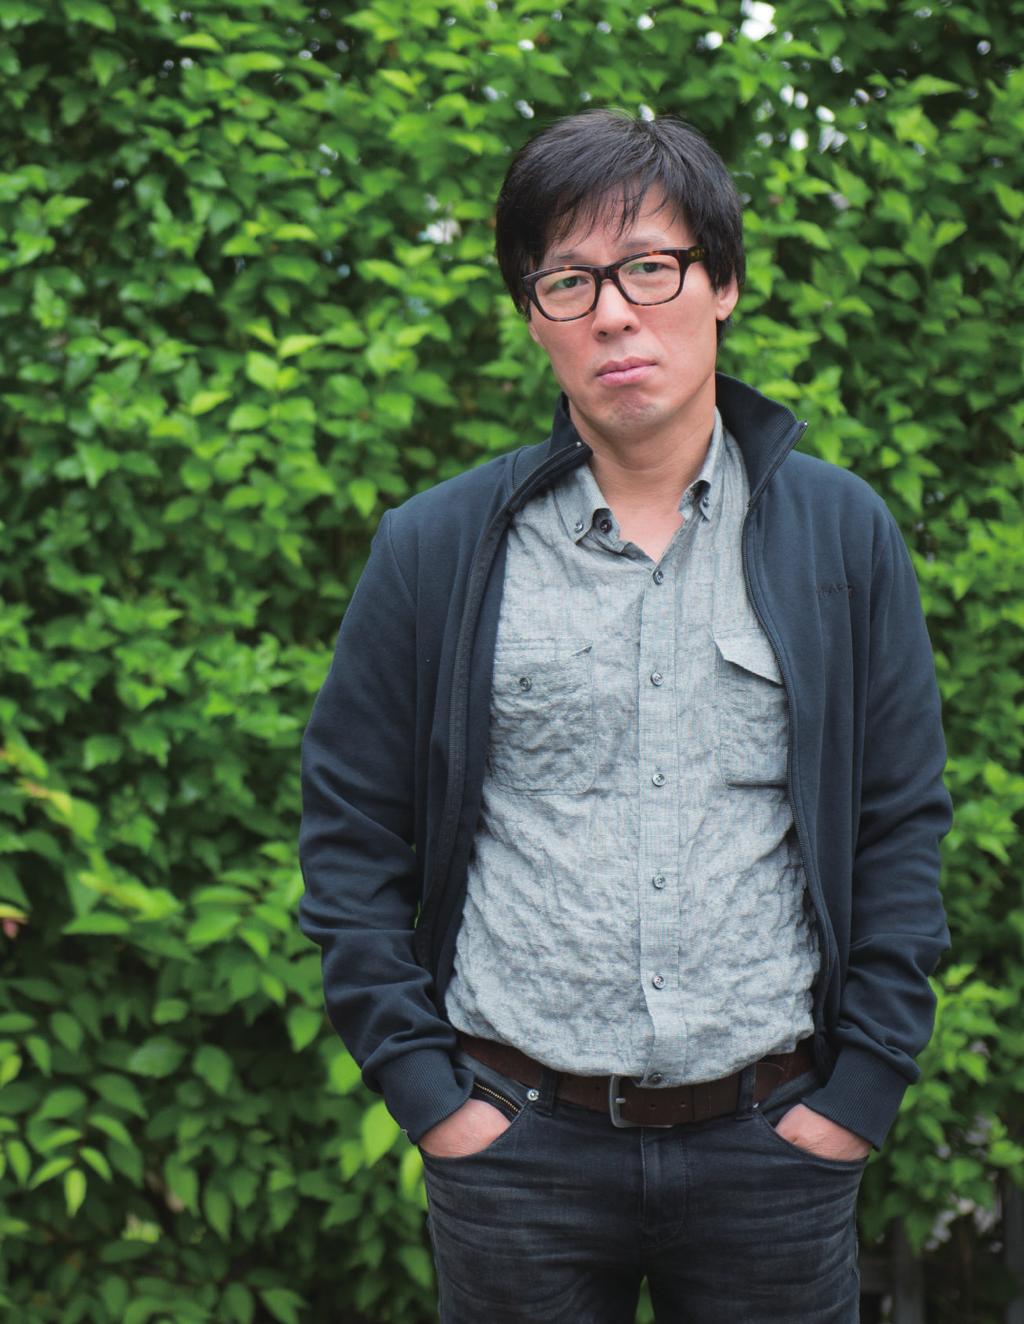 Essay Cheon Myeong-kwan Cheon Myeong-kwan made his literary debut with the short story Frank and I that won the Munhakdongne New Writer s Award in 2003.